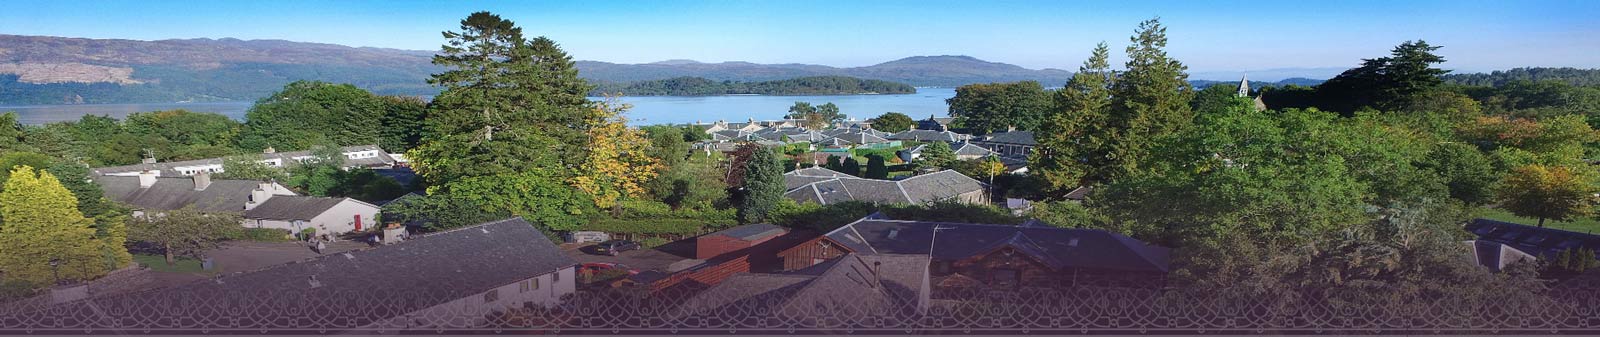 Birds eye view of Luss Village and Glenview Accomodation with Loch Lomond water in the background